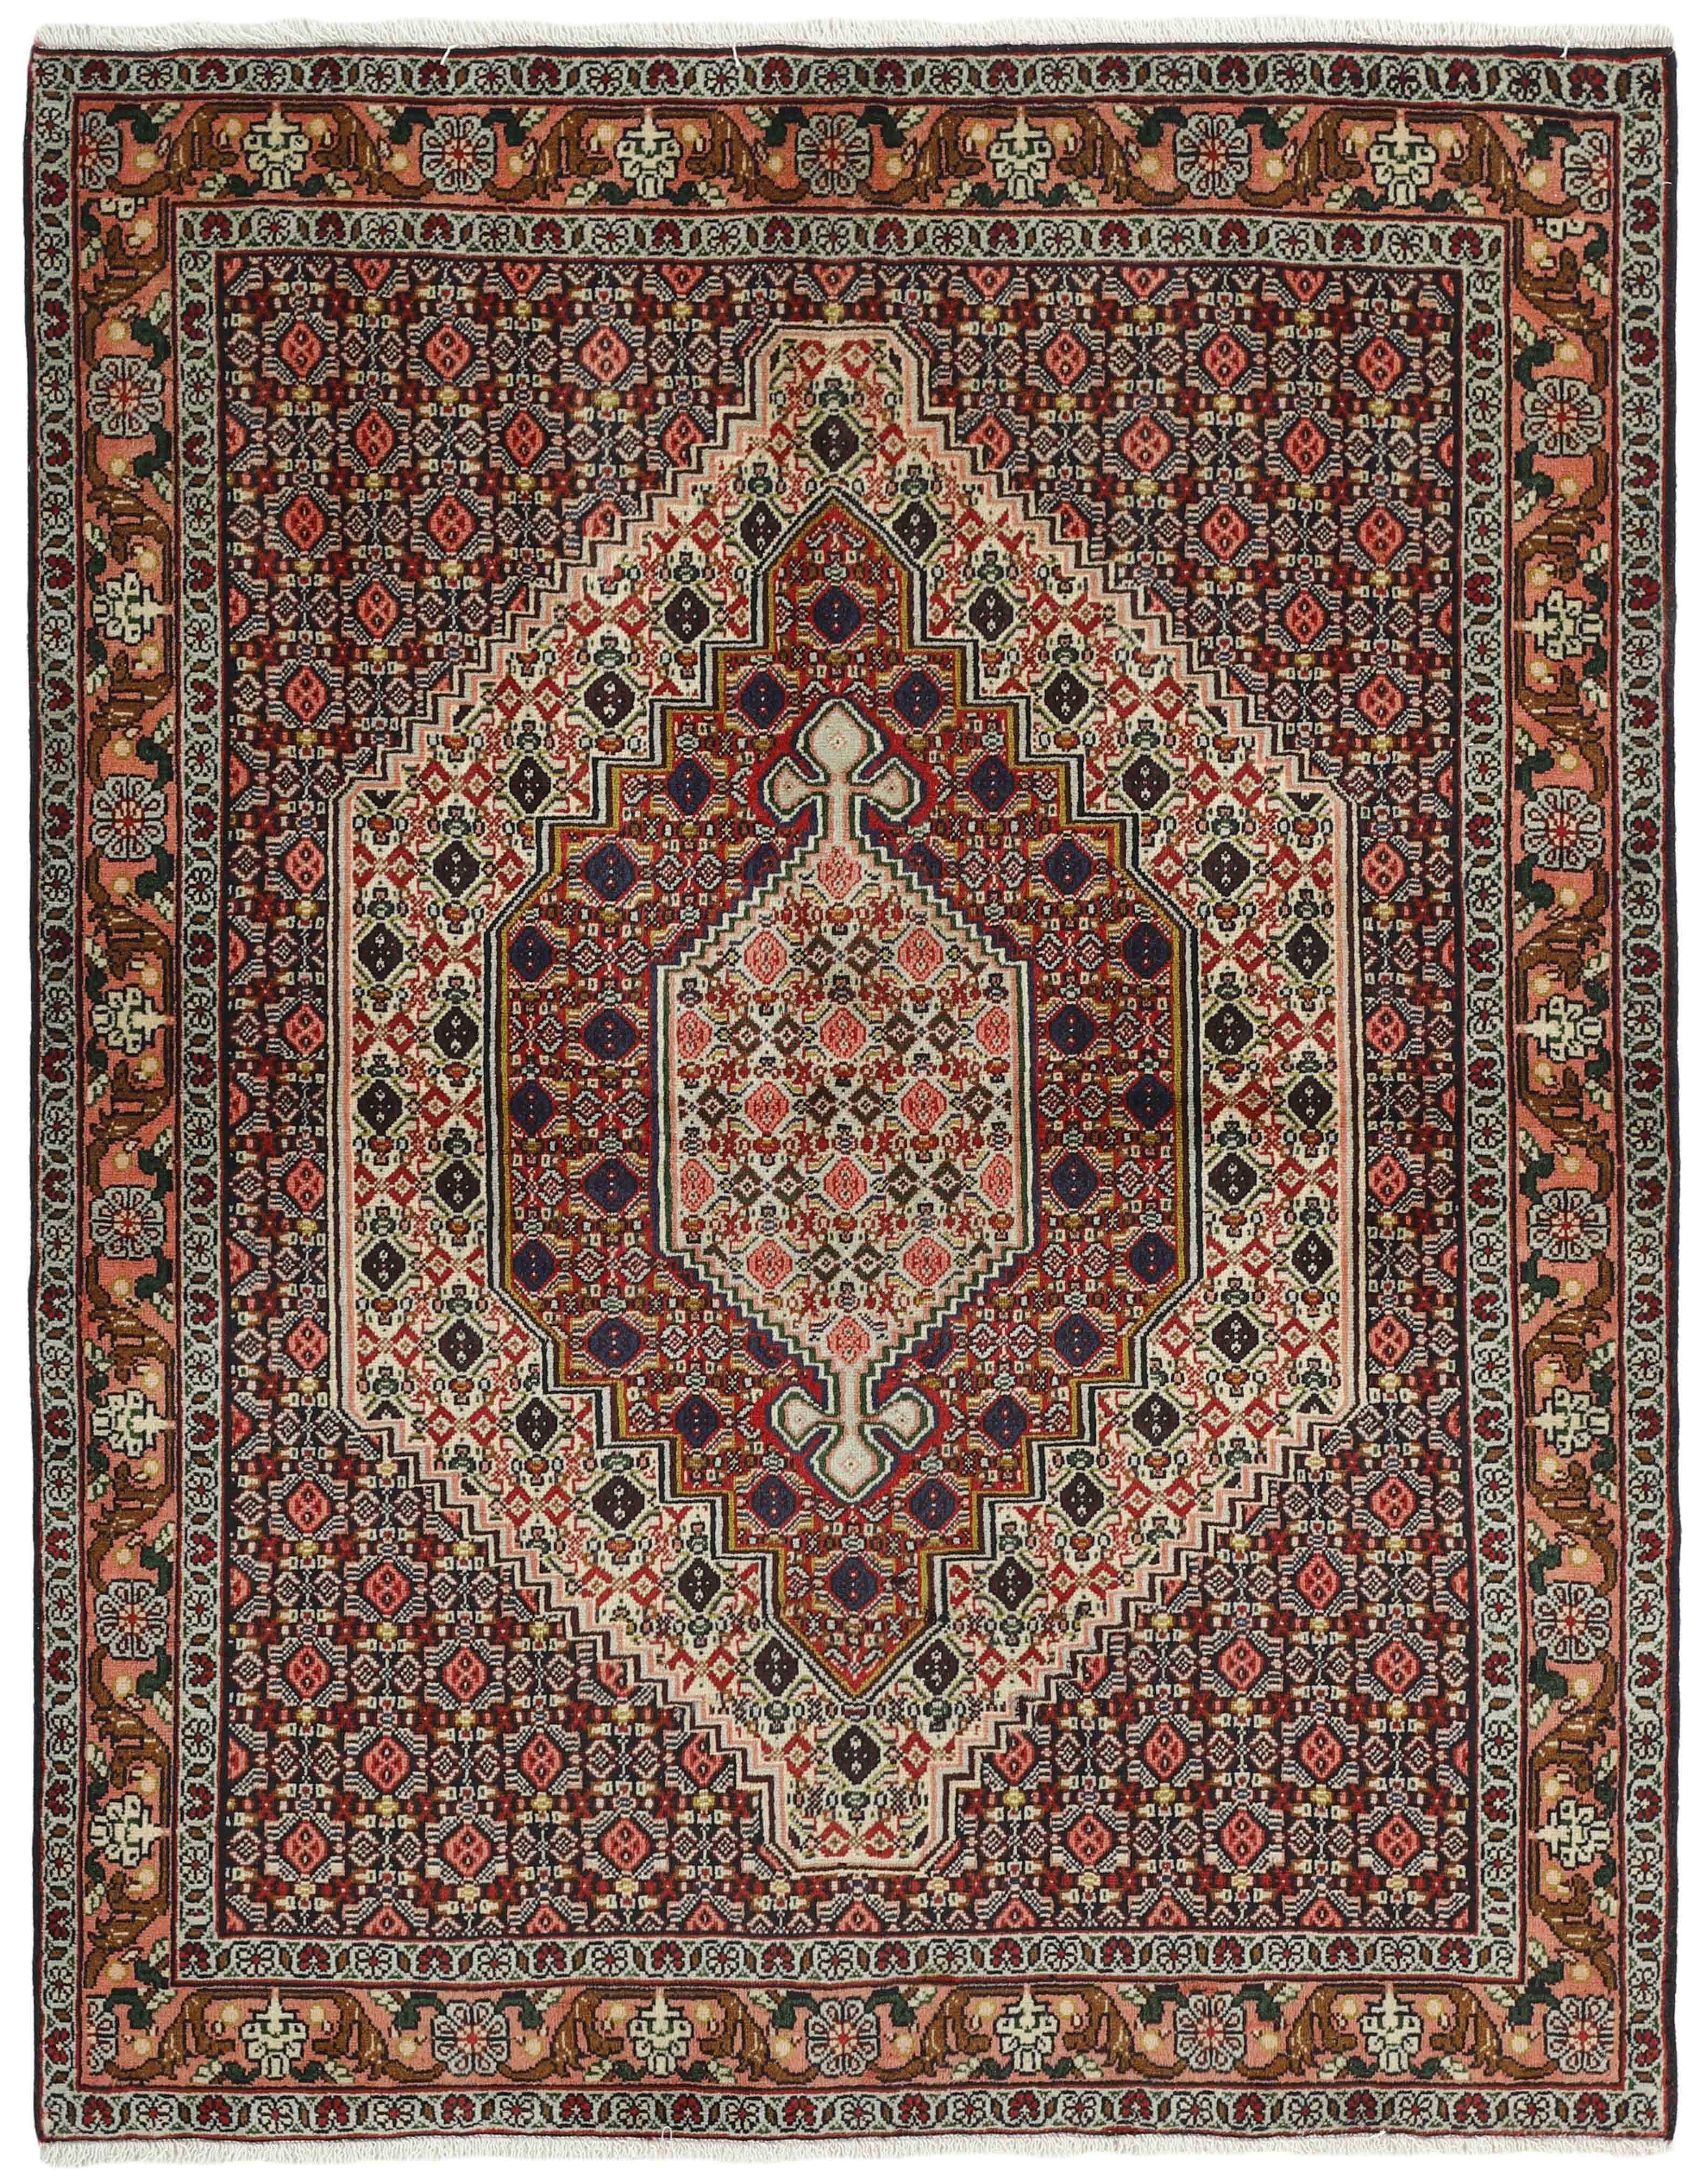 authentic persian rug with a traditional geometric design in red